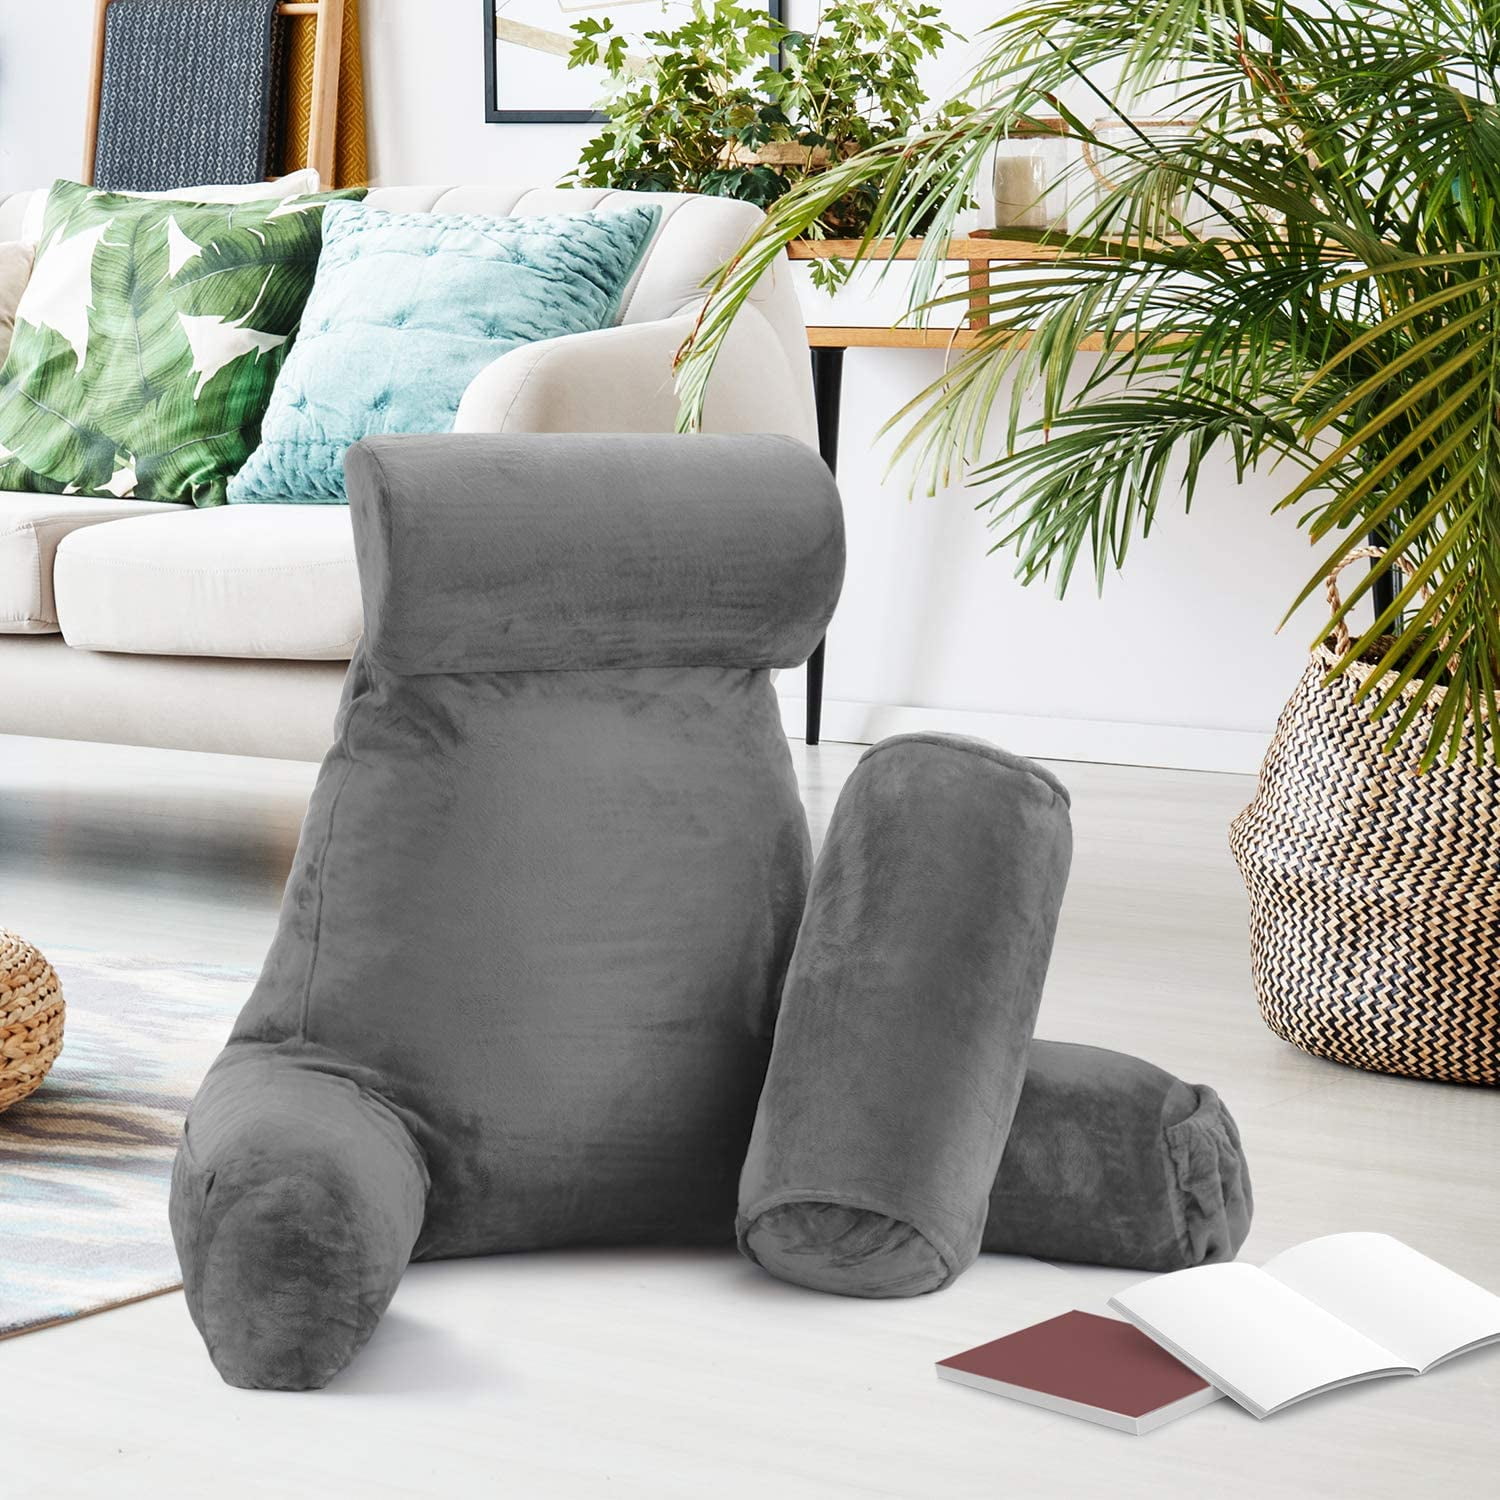 Read Light Grey, L Sturdy Arm Supports Comfort Reading Pillow Lounge or Work In Bed Super-Stuffed for Comfort & Proper Posture 